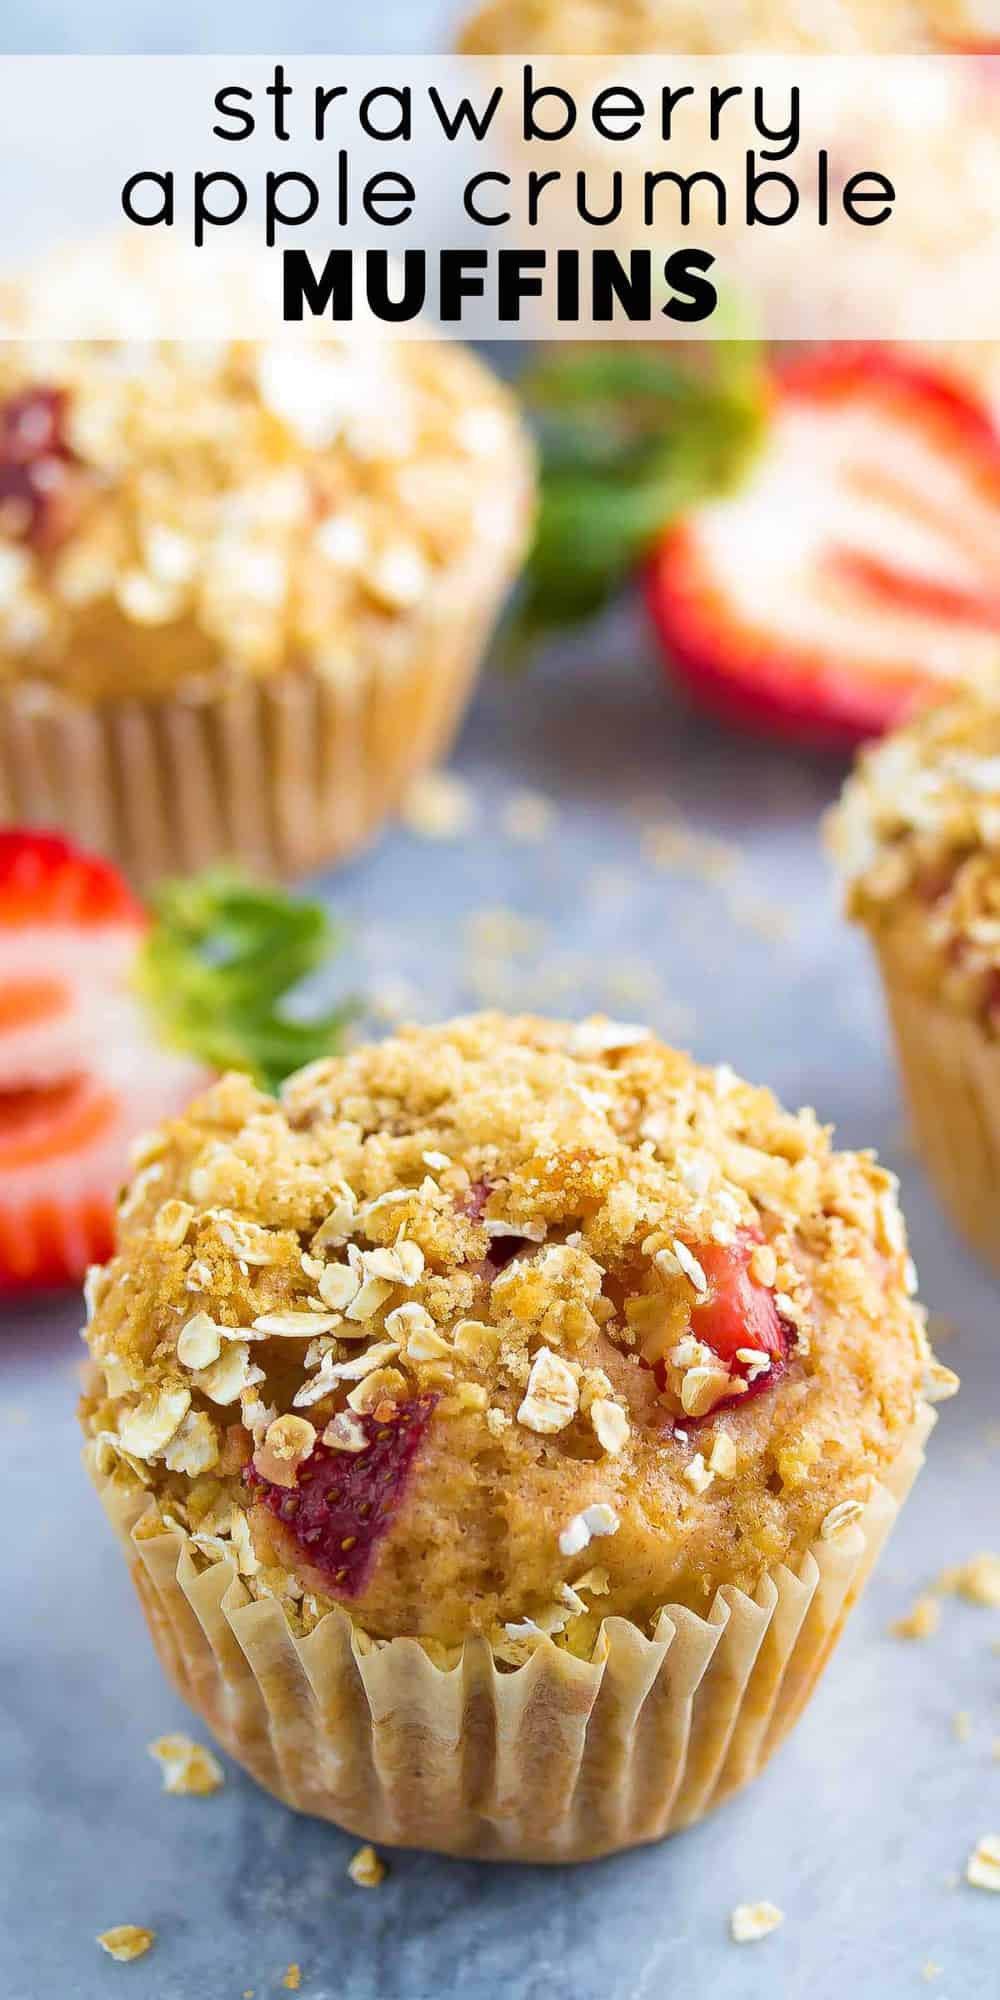 These strawberry apple crumble muffins will satisfy your muffin cravings while keeping things healthy. No butter or oil, half whole wheat flour, and only 140 calories each!